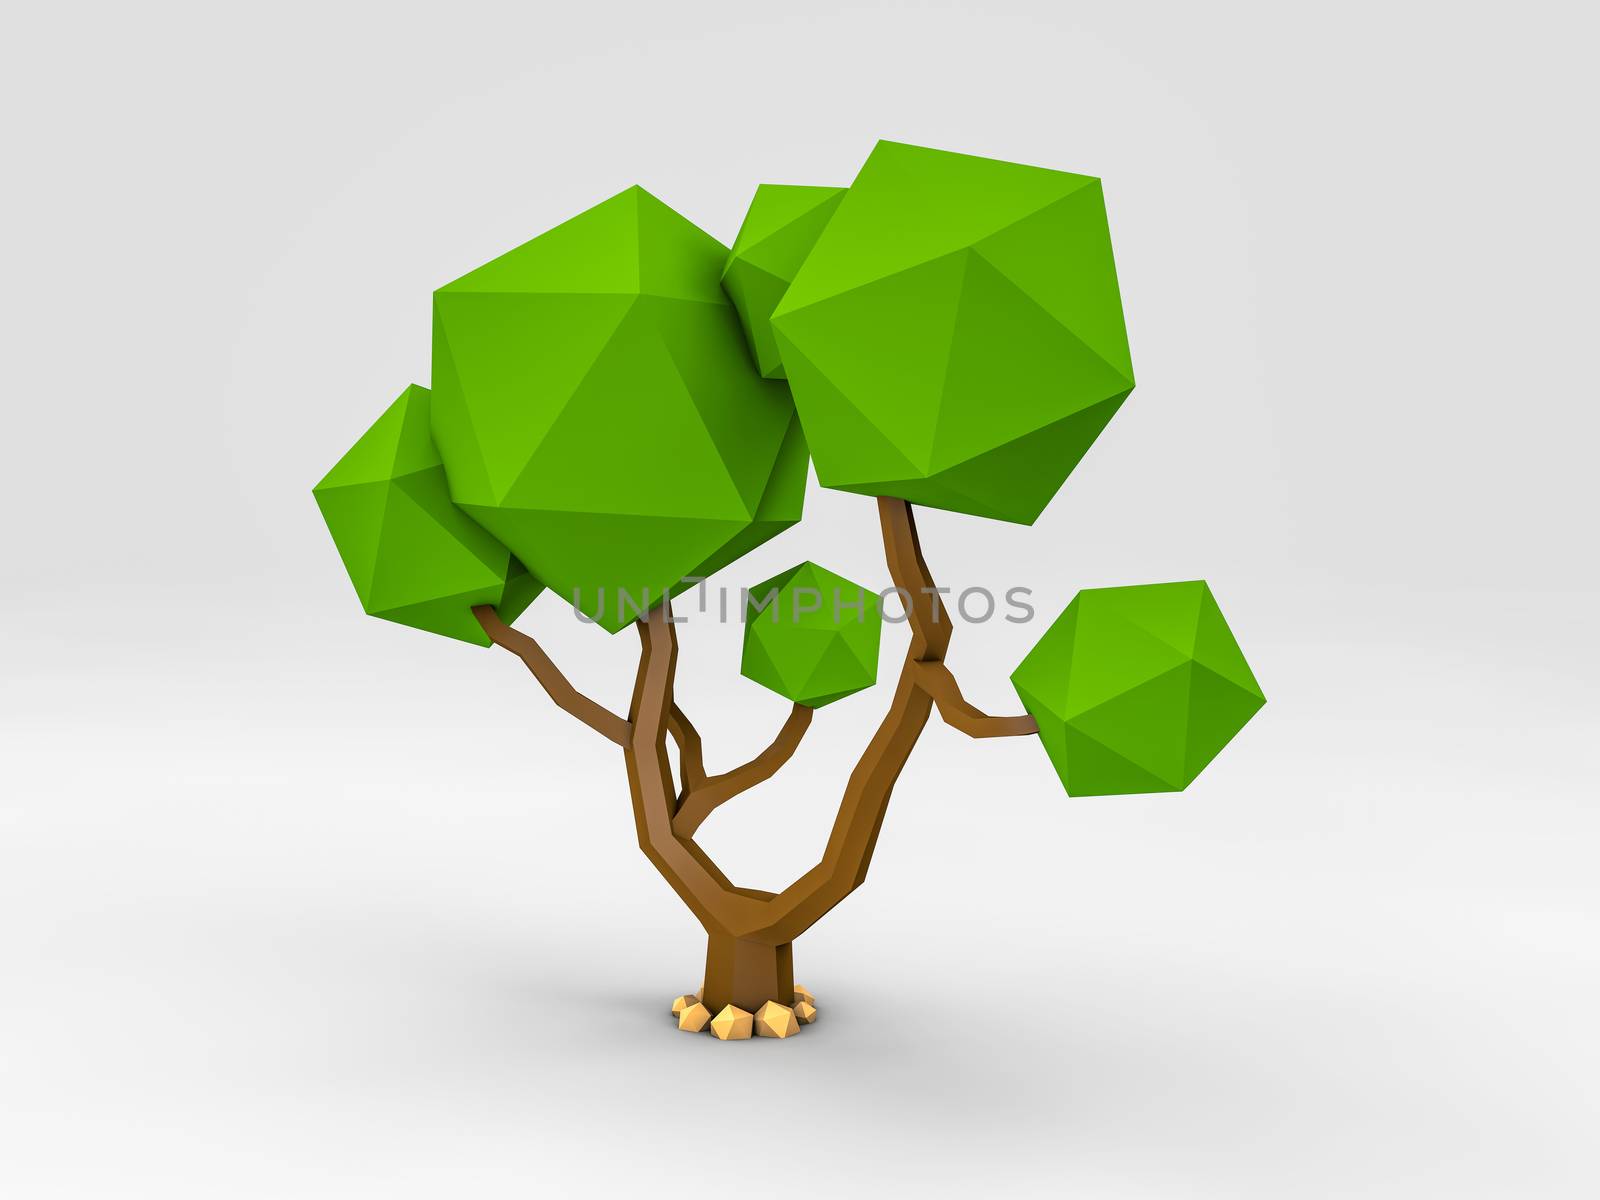 3d Rendering of tree in low poly style, clipping path included by tussik